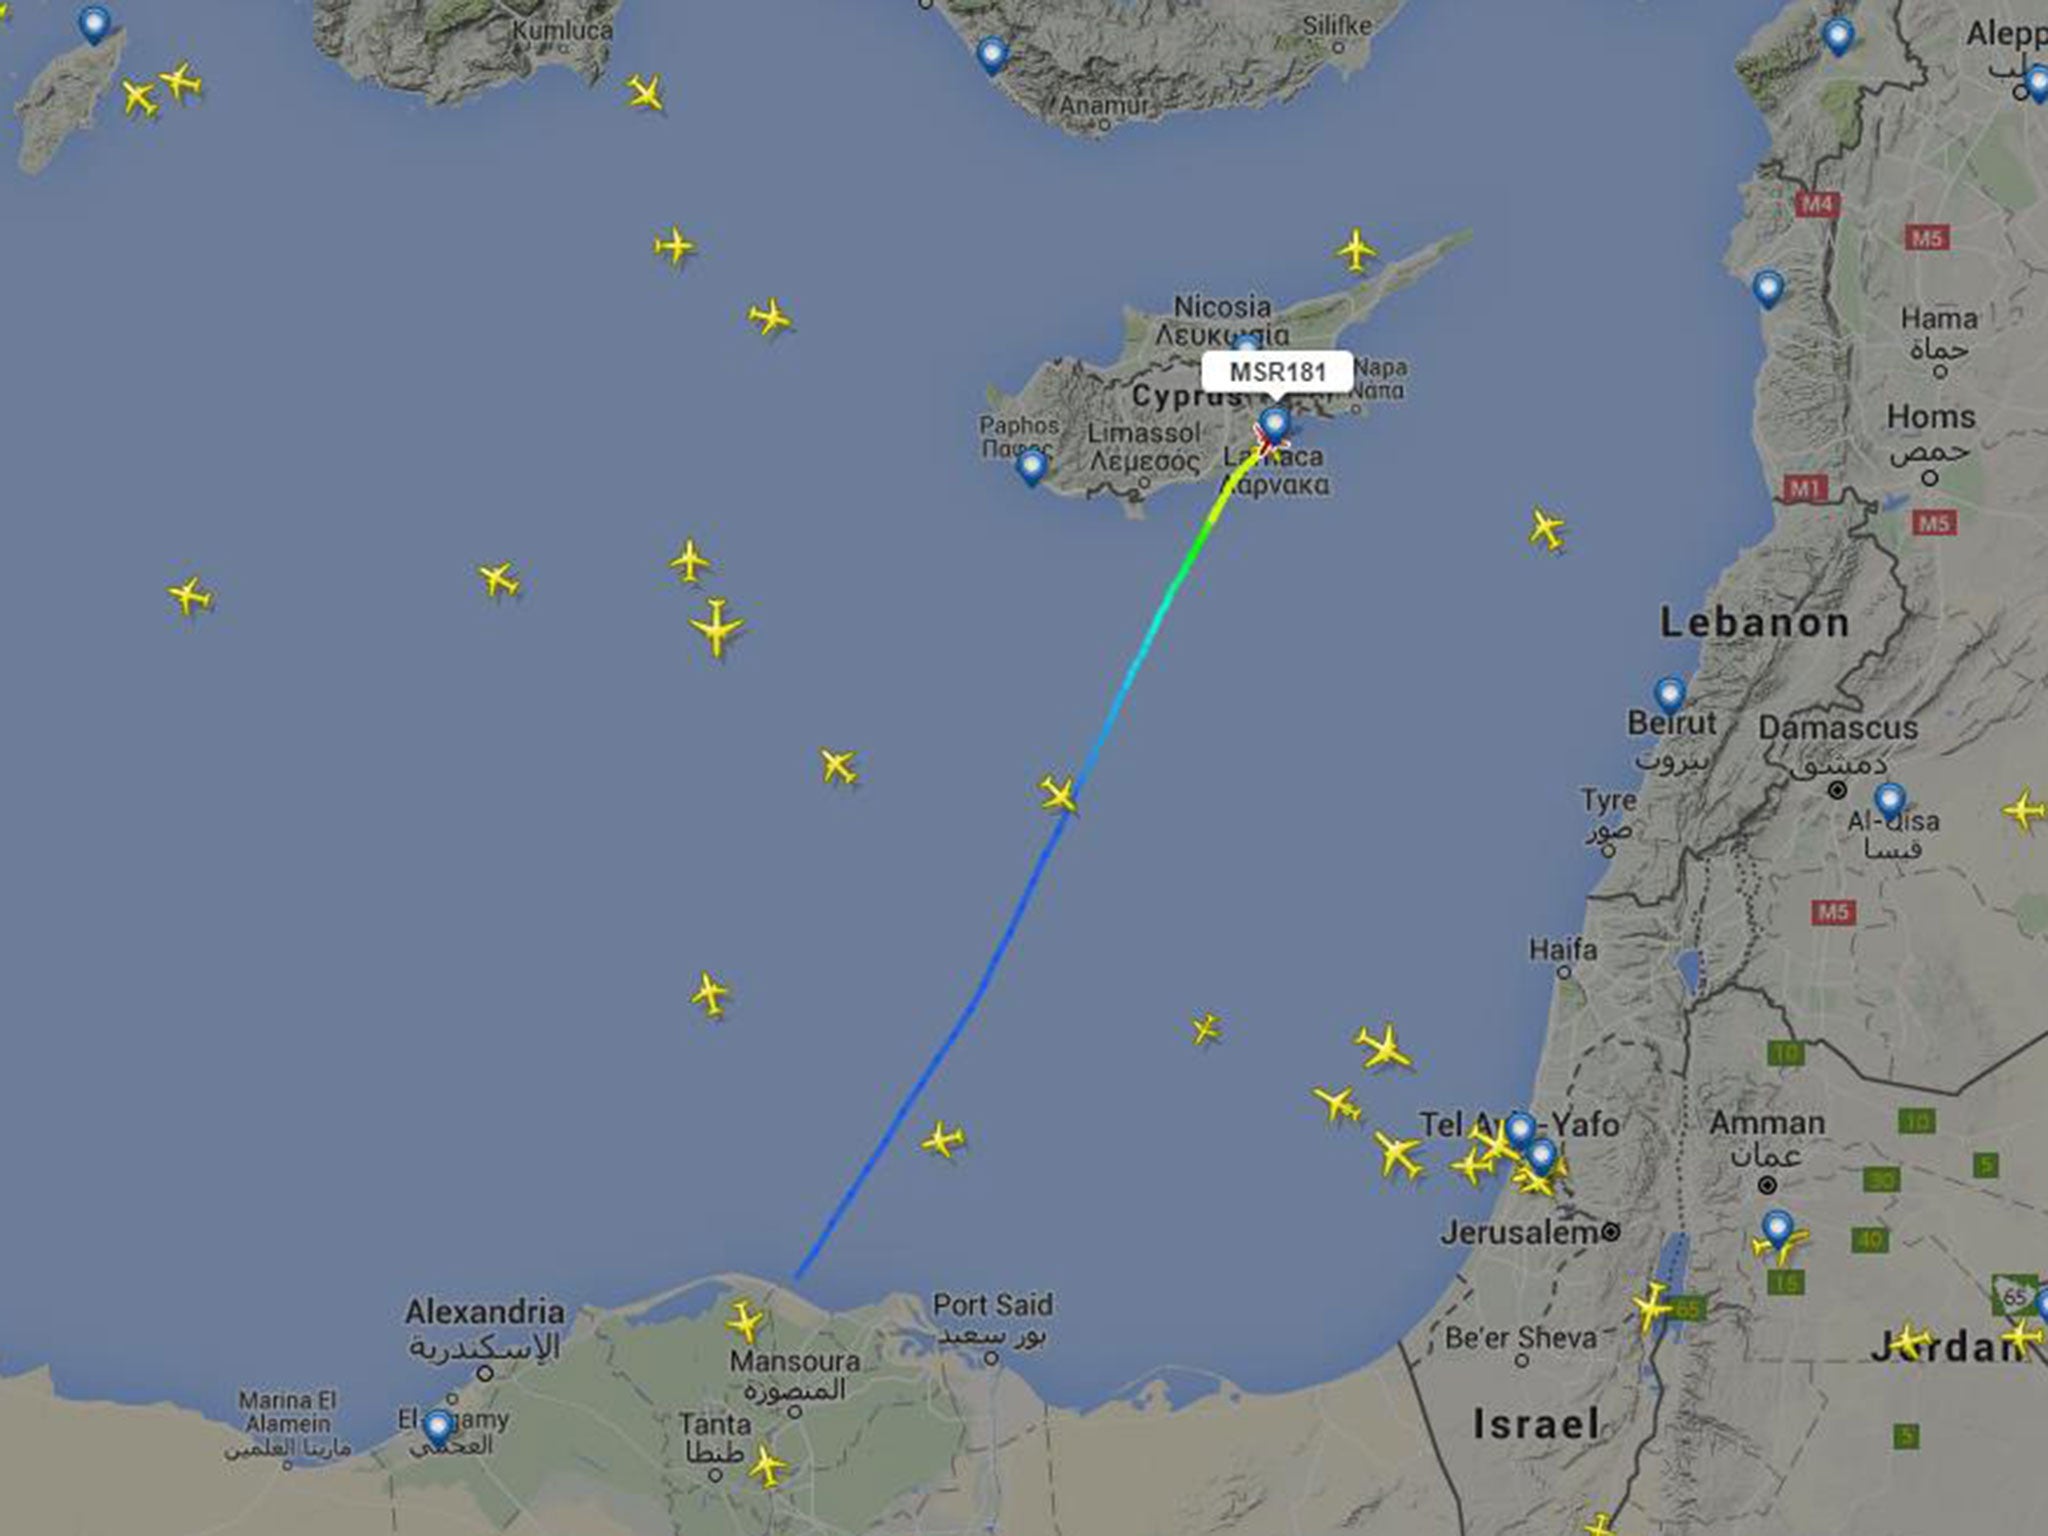 The recorded flight path of EgyptAir flight 181 showed it landing in Cyprus